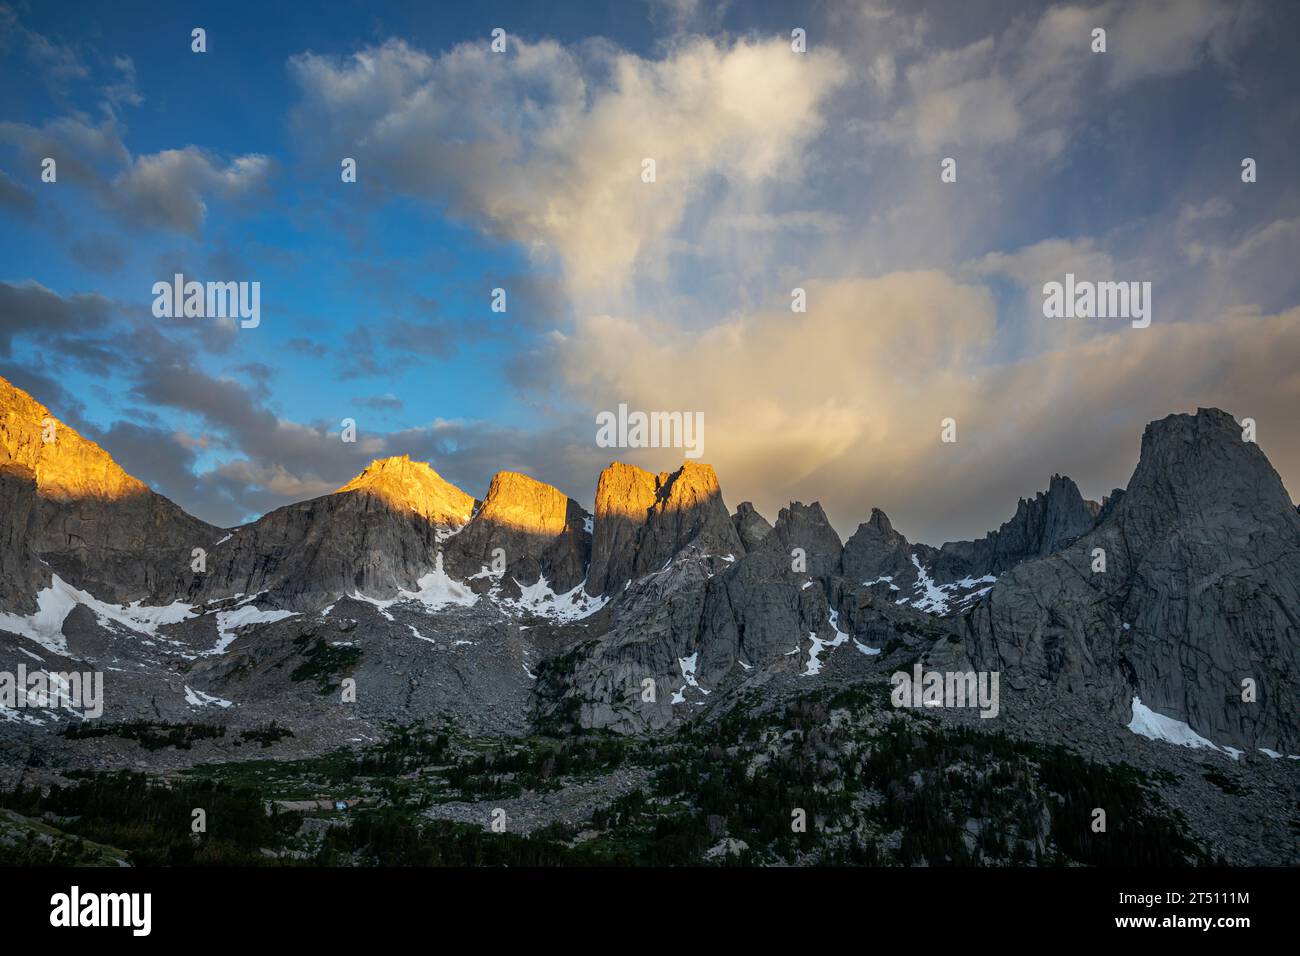 WY05588-00...WYOMIMNG - Sunrise at the Cirque of the Towers in the Popo Agie Wilderness area of the Wind River Range. Stock Photo